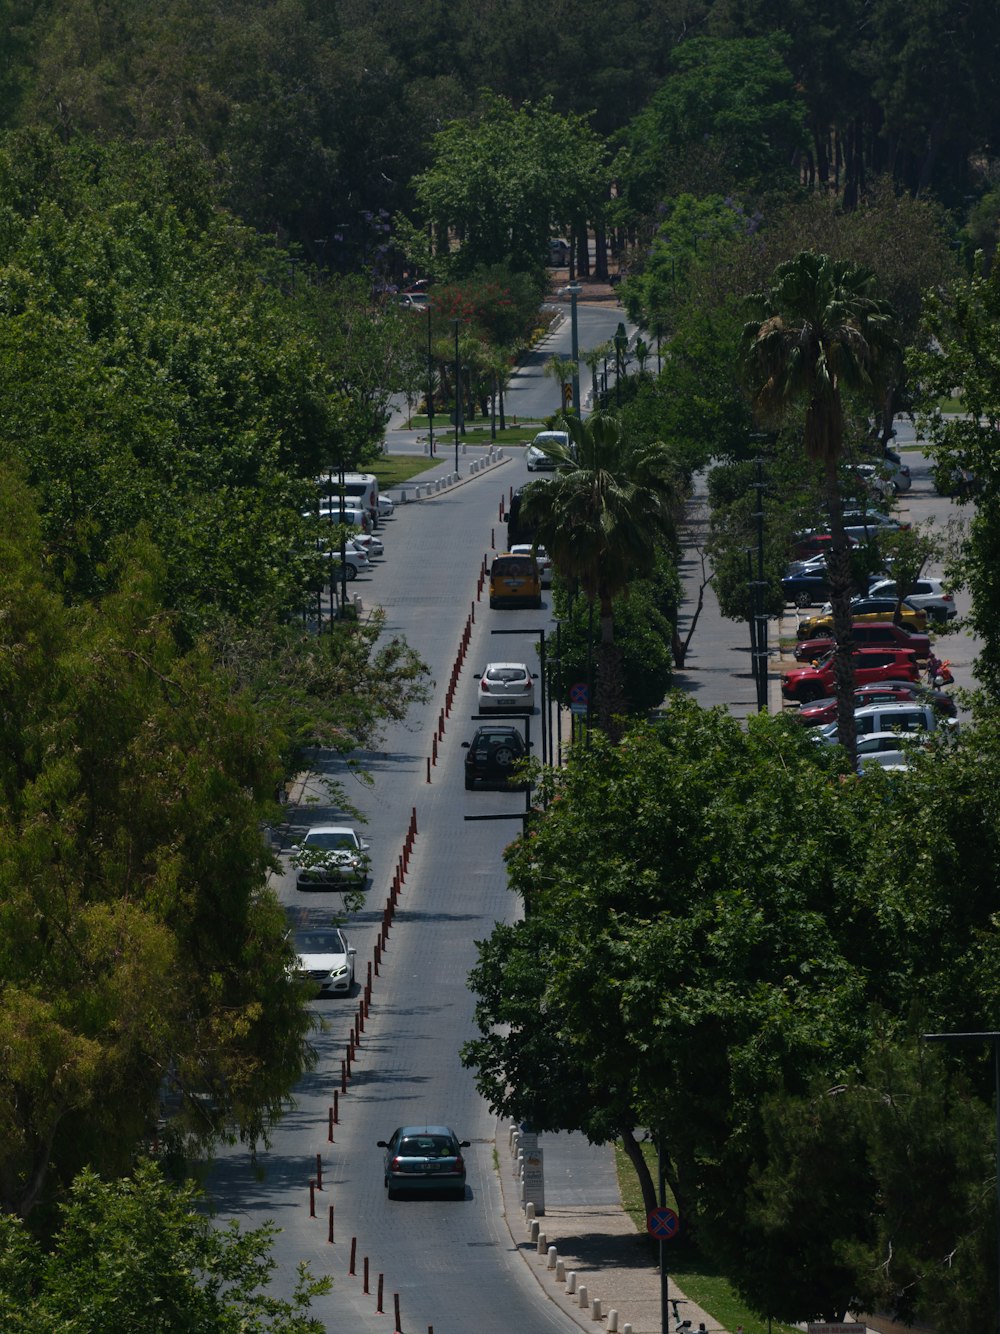 a view of a street with cars parked on both sides of it